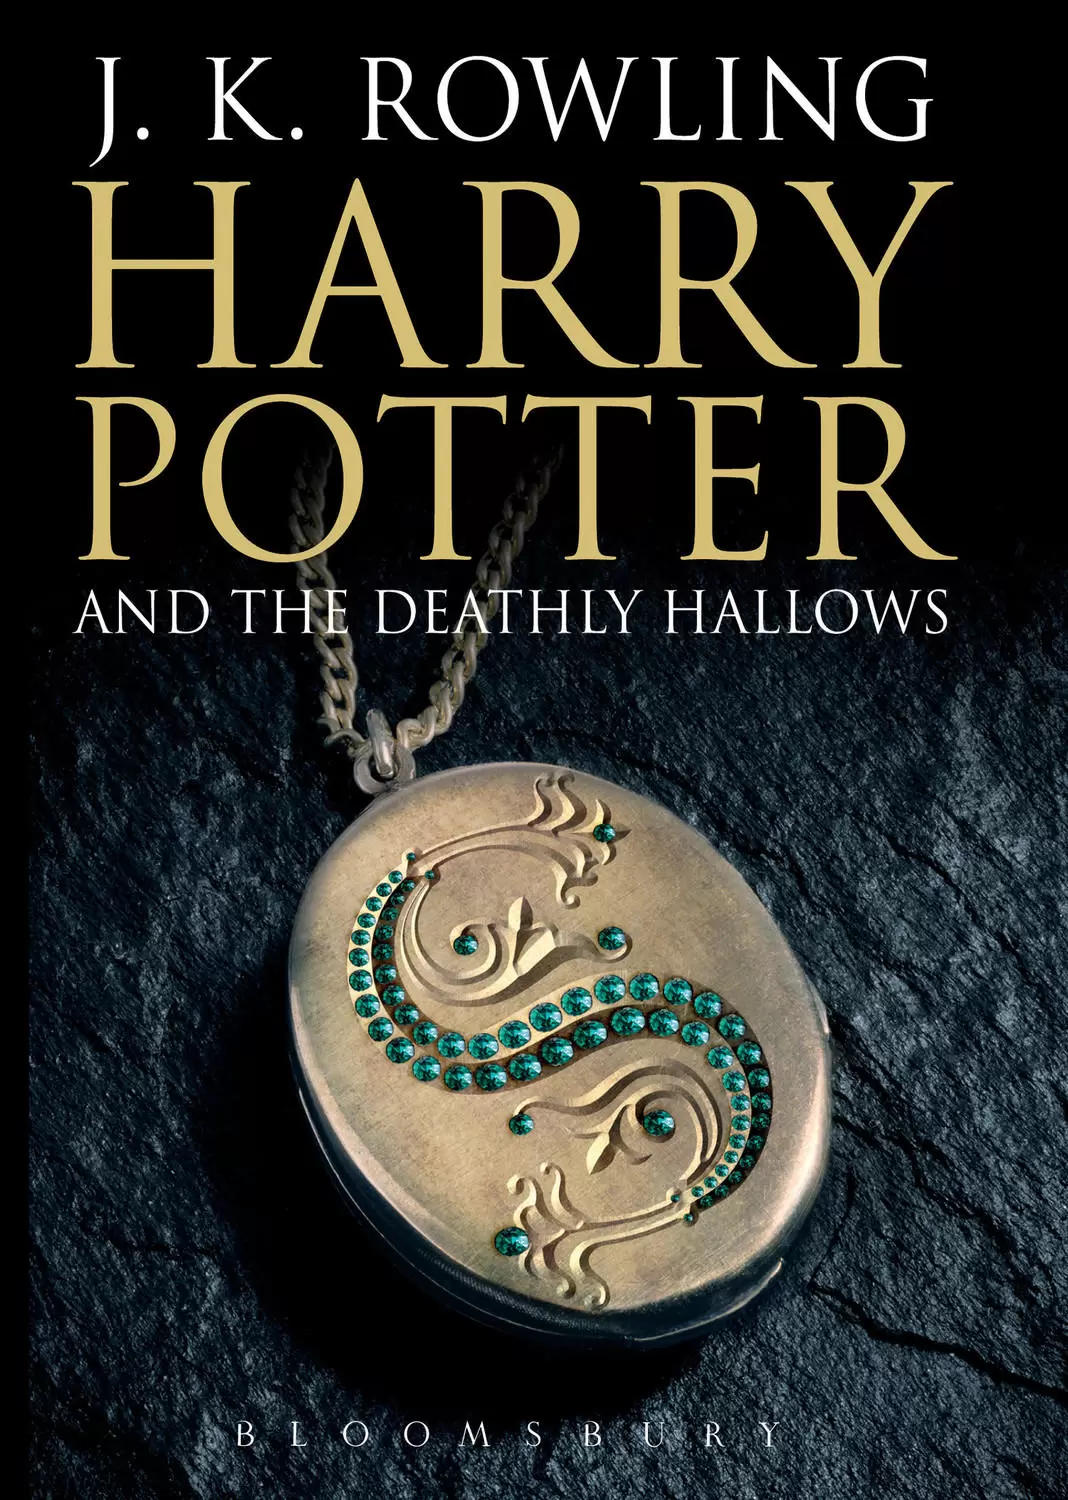 Livres Harry Potter et Animaux Fantastiques - Harry Potter and the Deathly Hallows